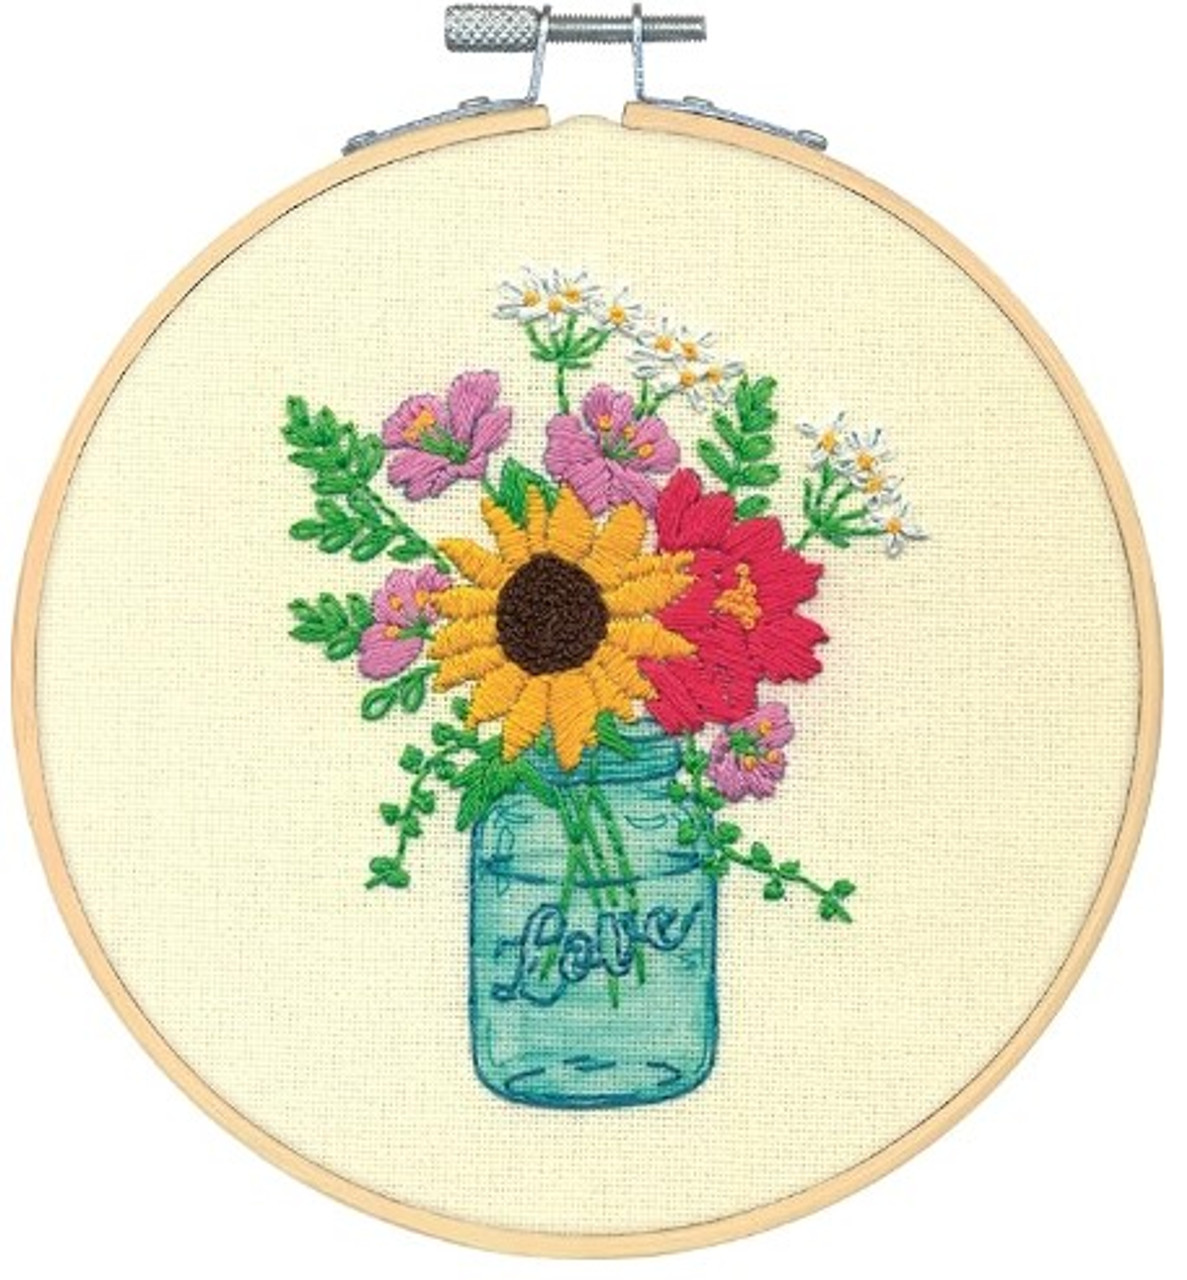 Dimensions Floral Jar Needlepoint Embroidery Kit with fabric, pattern, needle, threads & Bamboo Hoop - 6" diameter